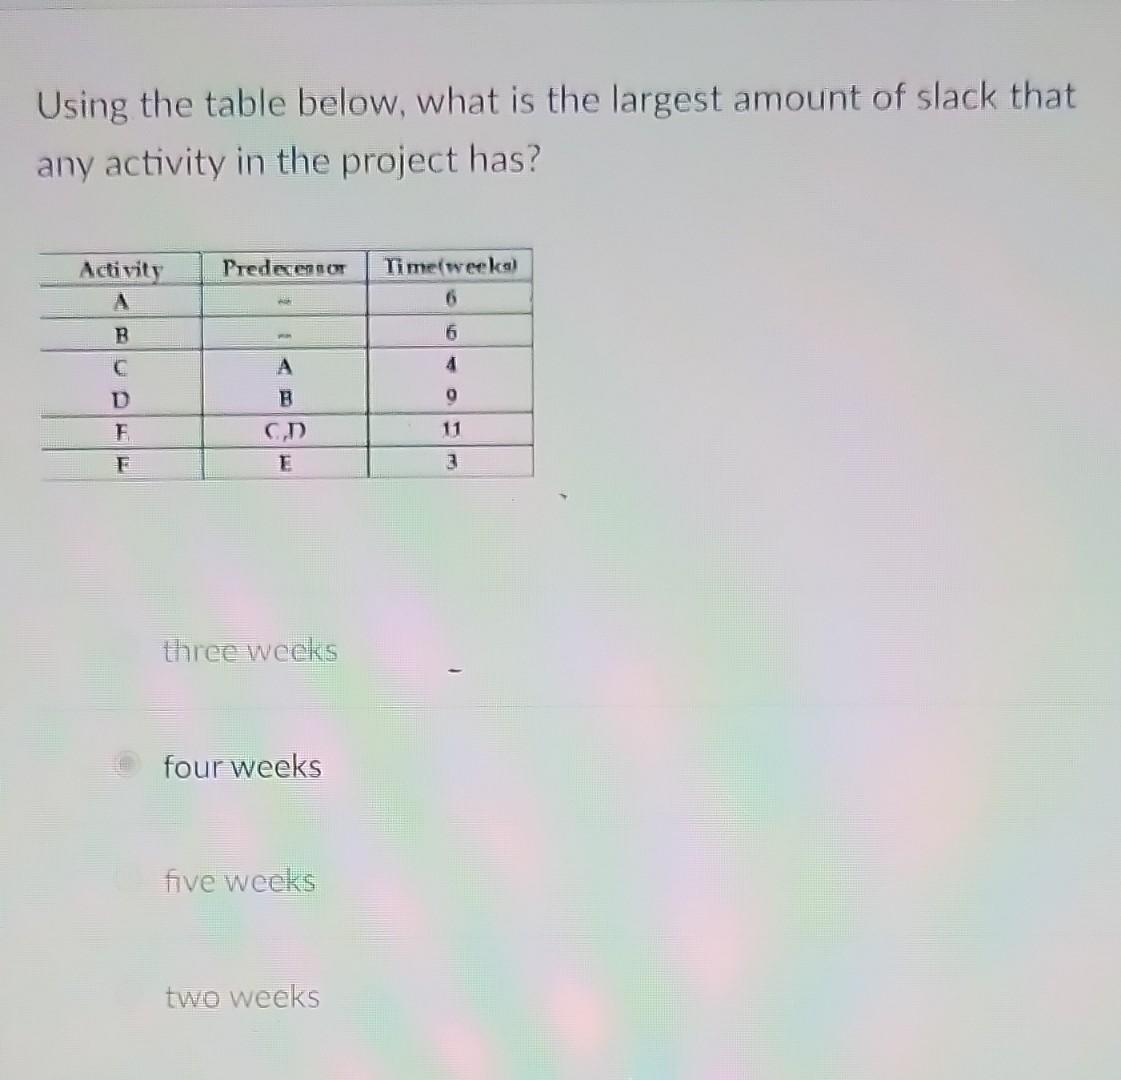 Using the table below, what is the largest amount of slack that
any activity in the project has?
Activity Predecessor
B
C
D
F
F
8
A
B
CD
three weeks
four weeks
five weeks
two weeks
Time(weeks)
6
16
4
9
11
3